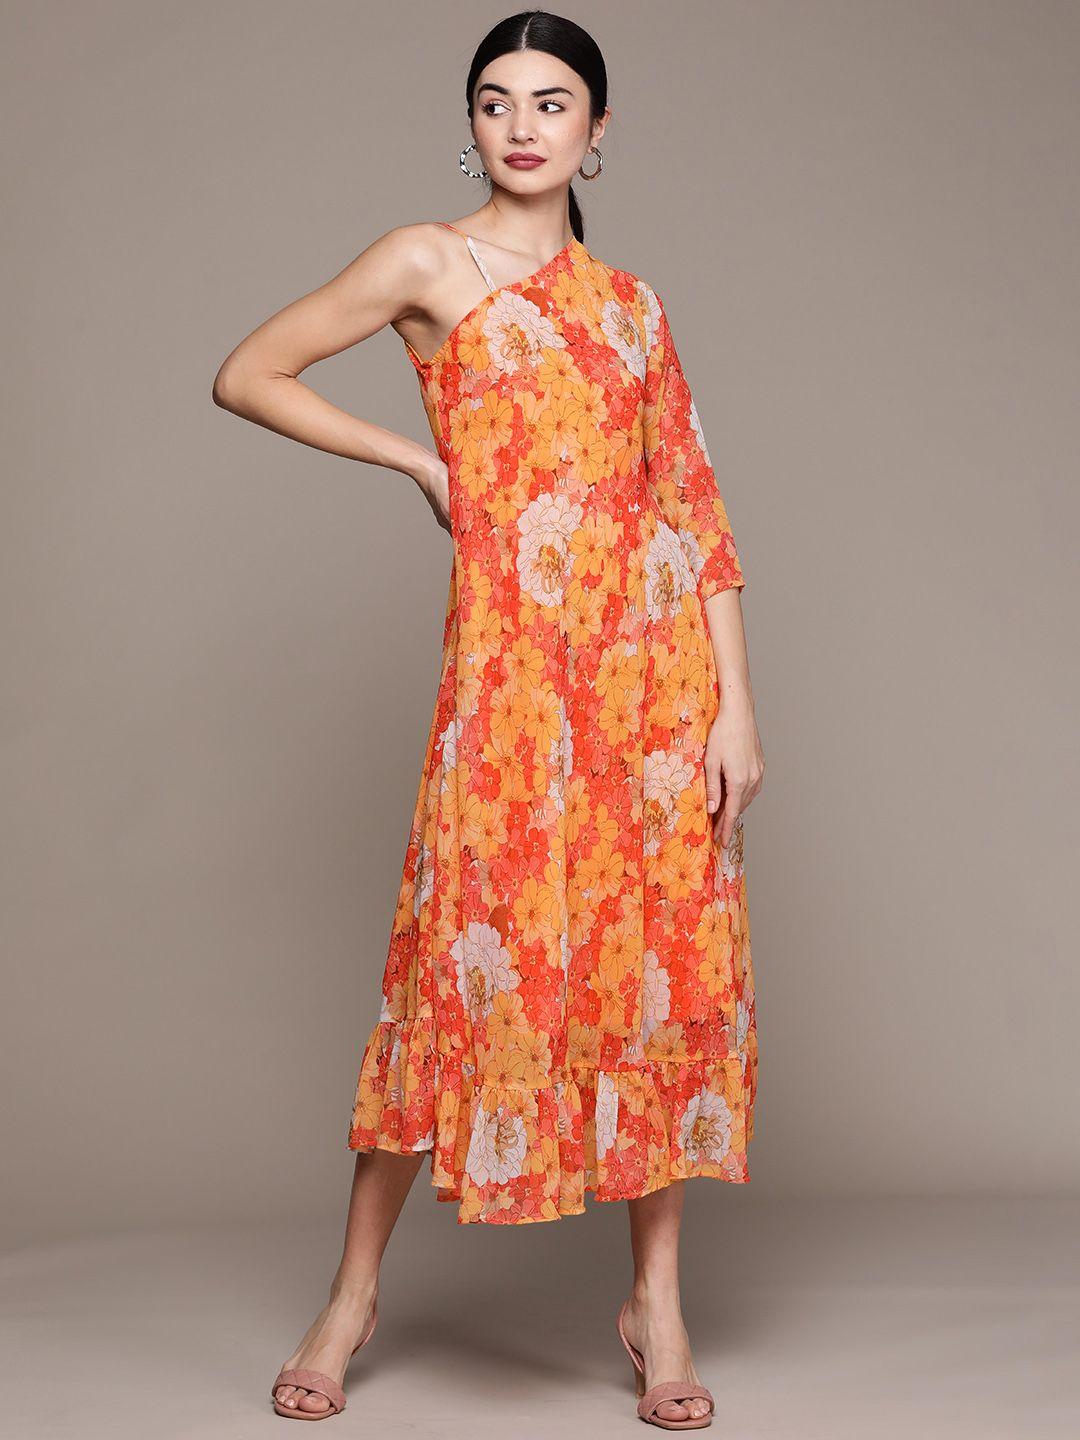 ziyaa mustard yellow & orange floral printed one shoulder georgette fit & flare maxi dress